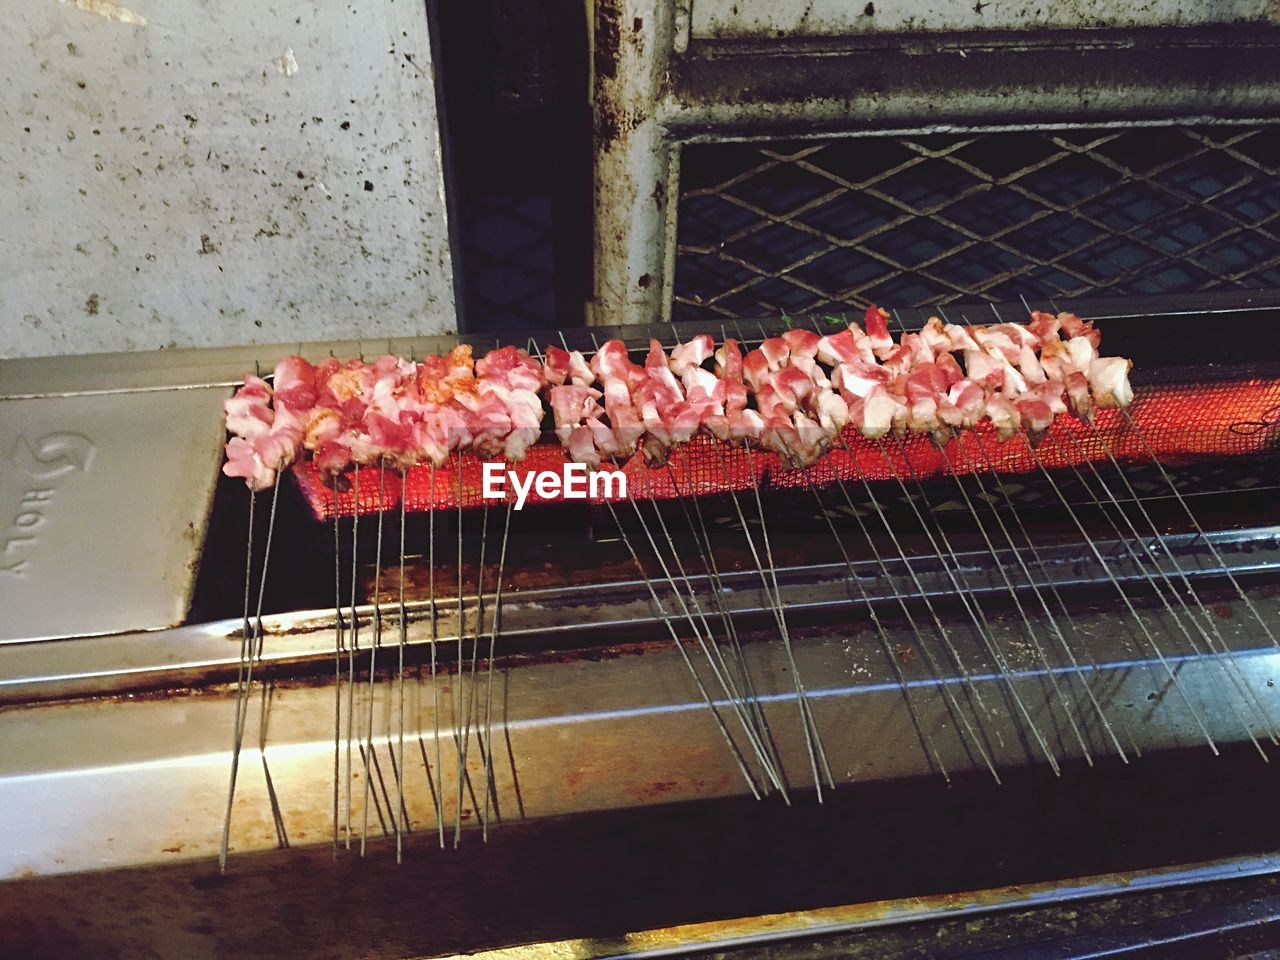 High angle view of food with skewers on barbecue